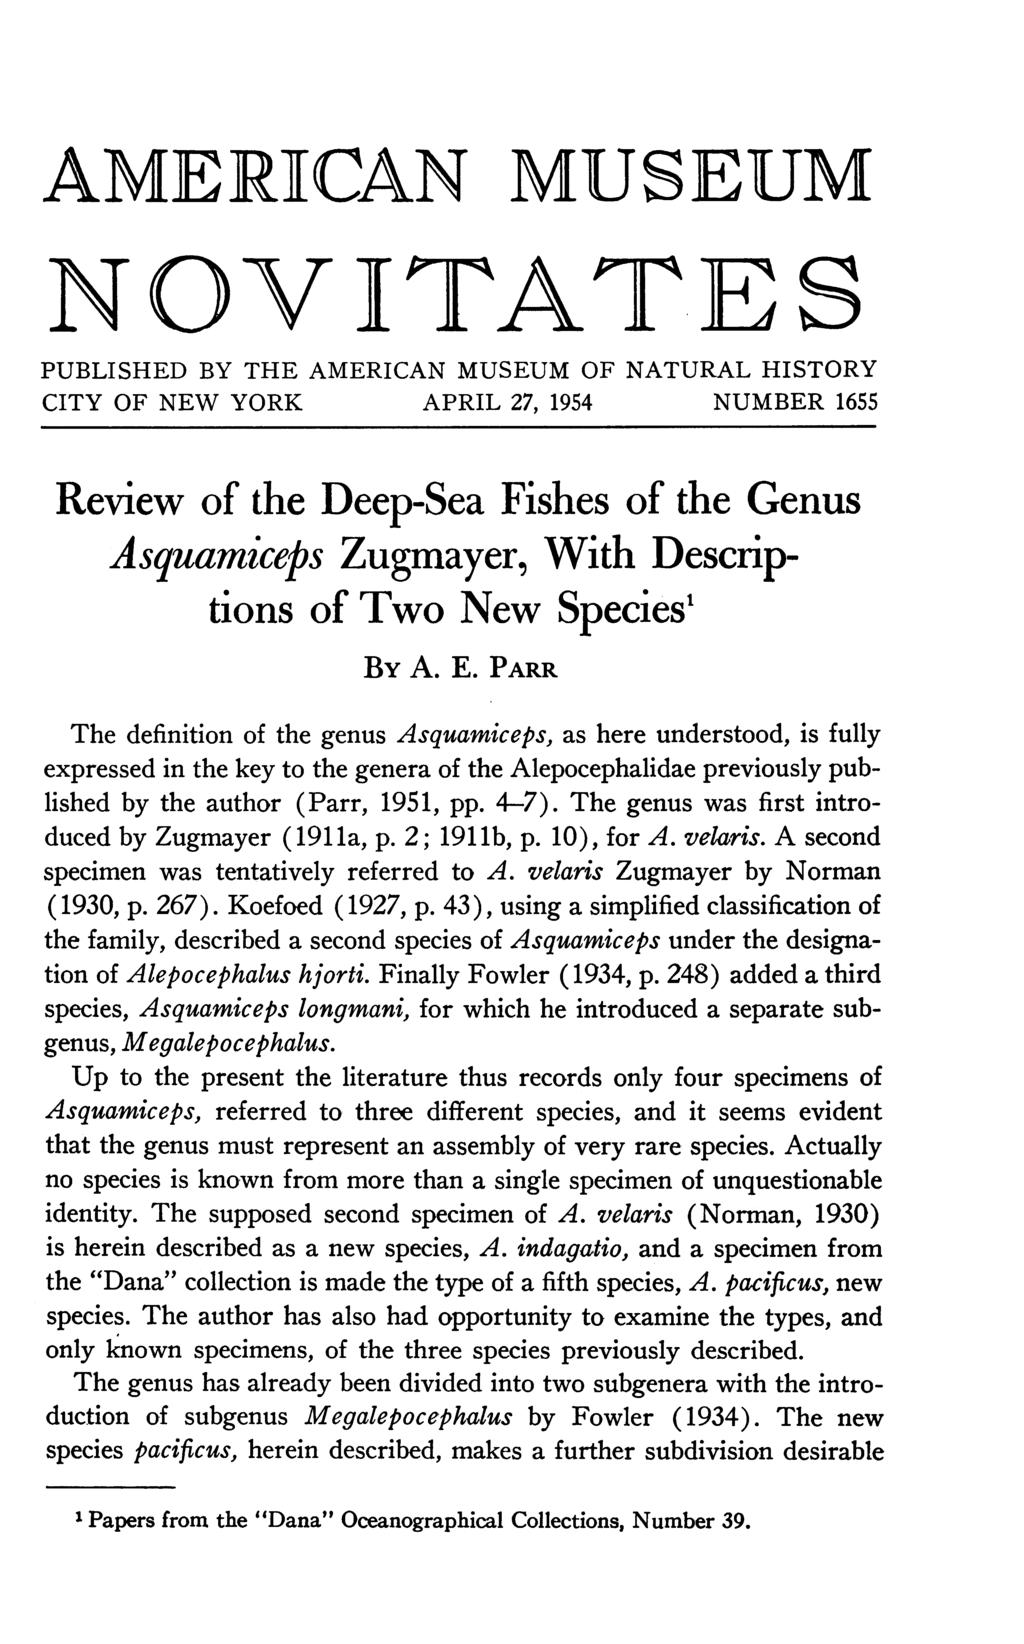 AtMERIICAN MUSEUM NOVITATES PUBLISHED BY THE AMERICAN MUSEUM OF NATURAL HISTORY CITY OF NEW YORK APRIL 27, 1954 NUMBER 1655 Review of the Deep-Sea Fishes of the Genus Asquamiceps Zugmayer, With